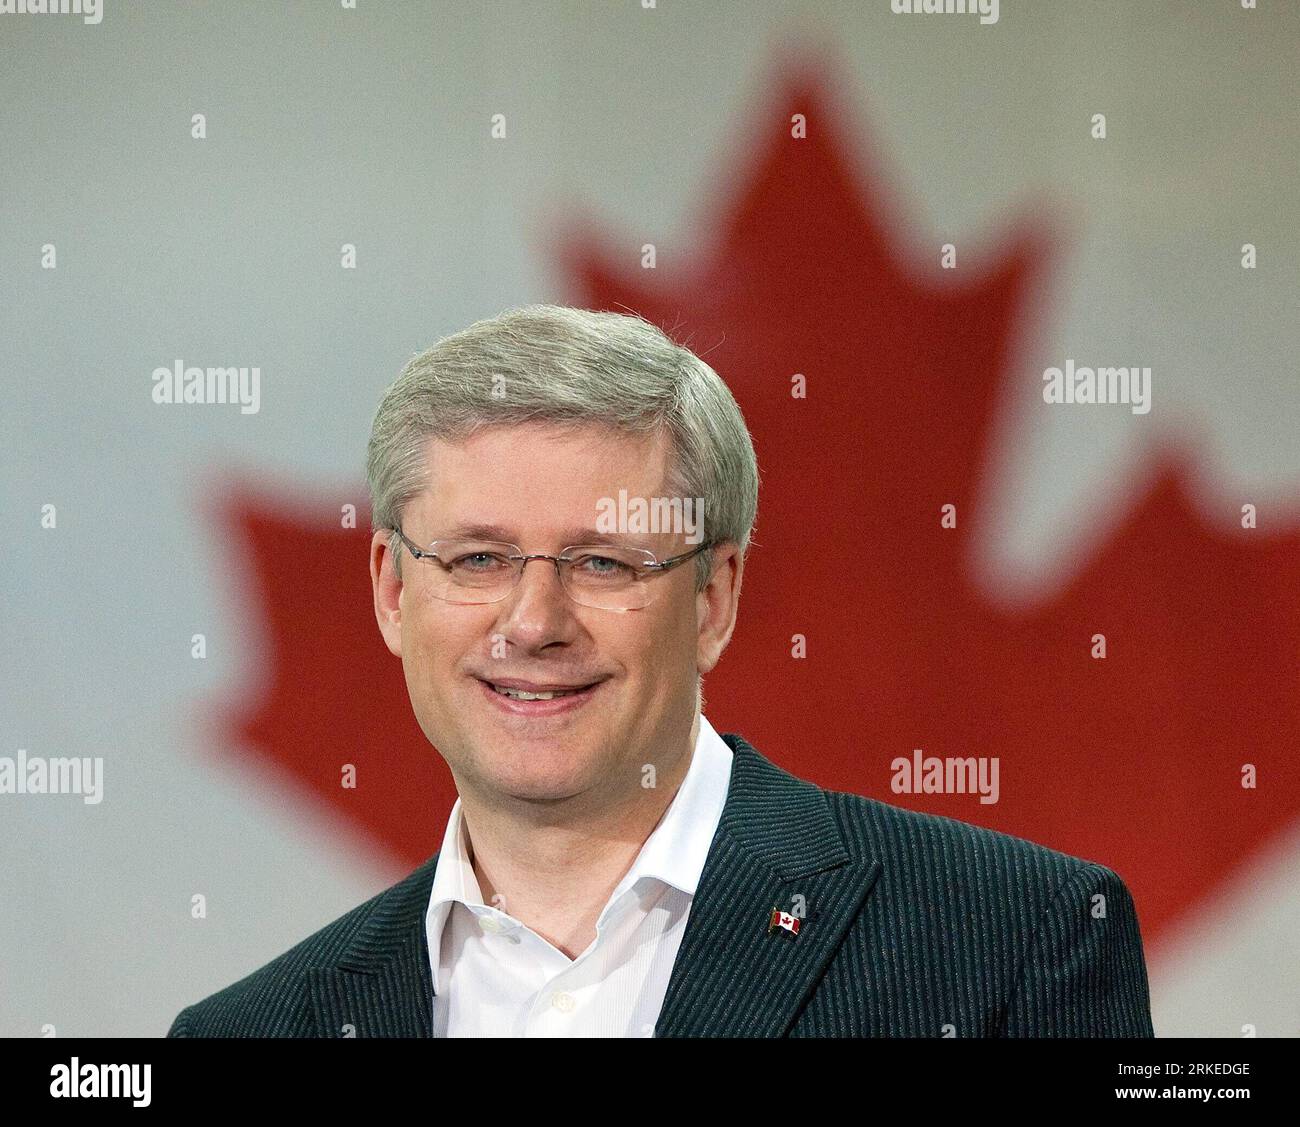 Bildnummer: 55241002  Datum: 06.04.2011  Copyright: imago/Xinhua (110406) -- TORONTO, April 6, 2011 (Xinhua) -- Canadian Prime Minister and Conservative Party leader Stephen Harper smiles to the media at a campaign stop in Markham, Ontario, Canada, April 6, 2011. All parties in Canada are competing for the 41st federal election after the dissolution of the 40th parliament on March 26, 2011. (Xinhua/TonyxKing) (zw) CANADA-ELECTION-CAMPAIGN-HARPER PUBLICATIONxNOTxINxCHN Politik People Wahlkampf Porträt kbdig xub 2011 quer premiumd     55241002 Date 06 04 2011 Copyright Imago XINHUA  Toronto Apri Stock Photo